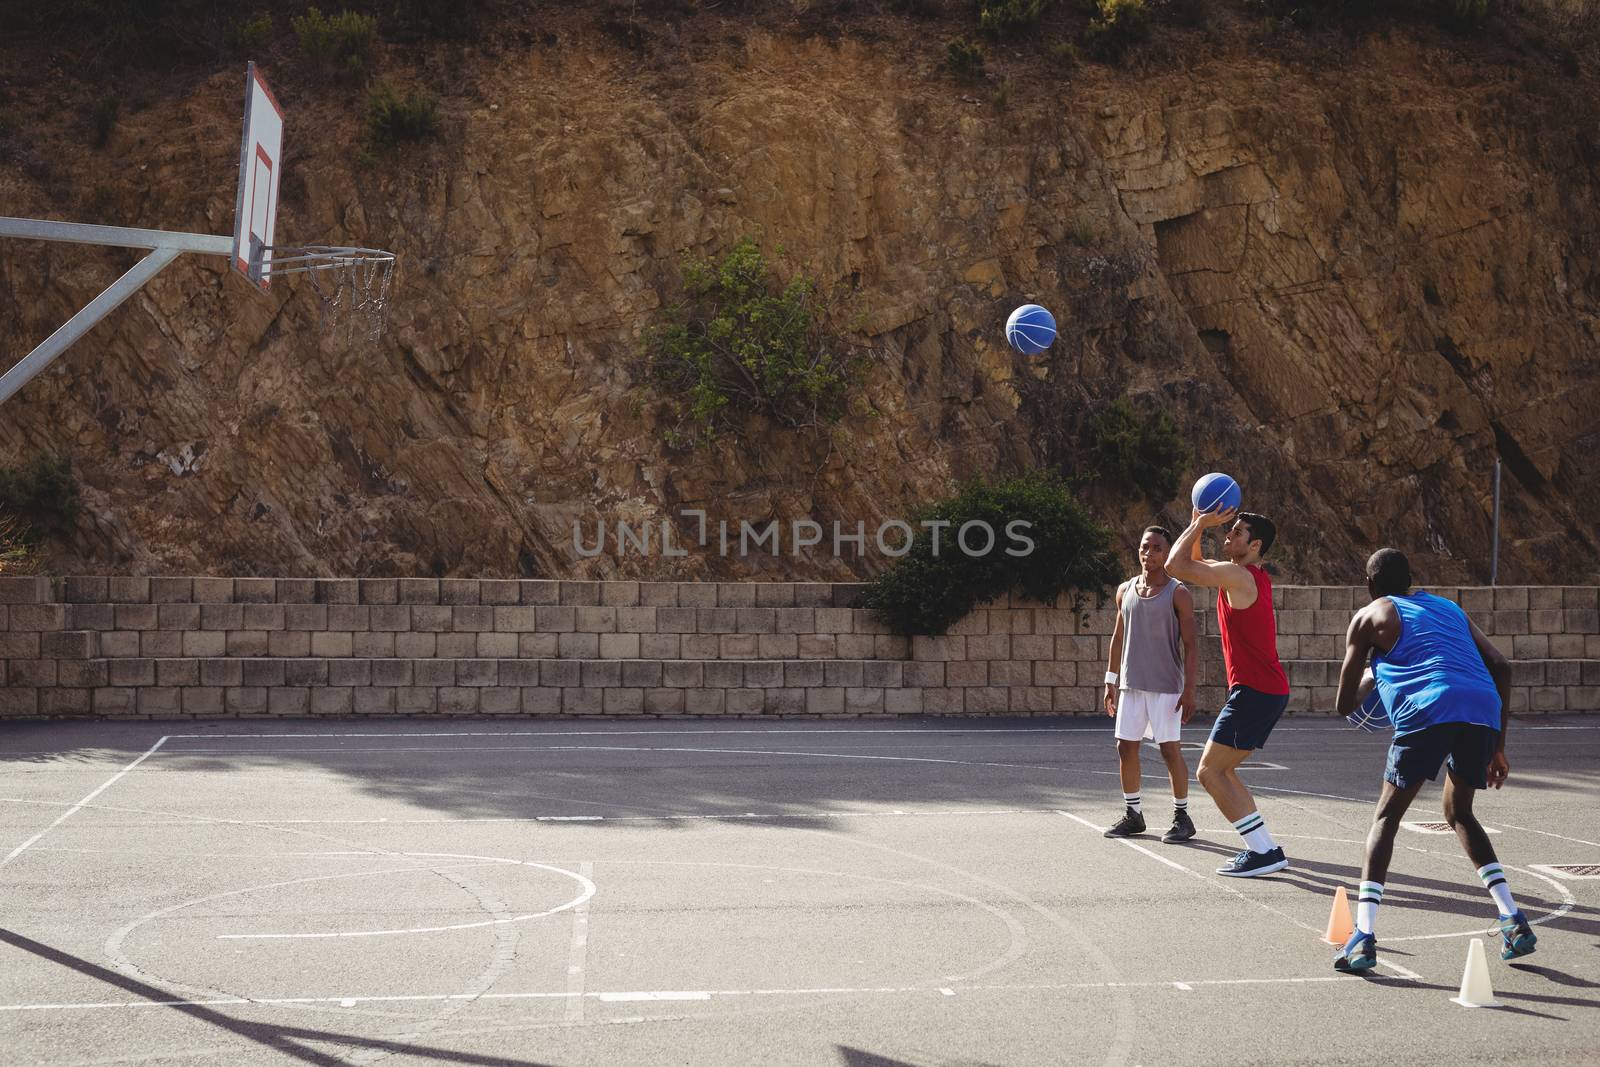 Basketball player taking a penalty shot by Wavebreakmedia